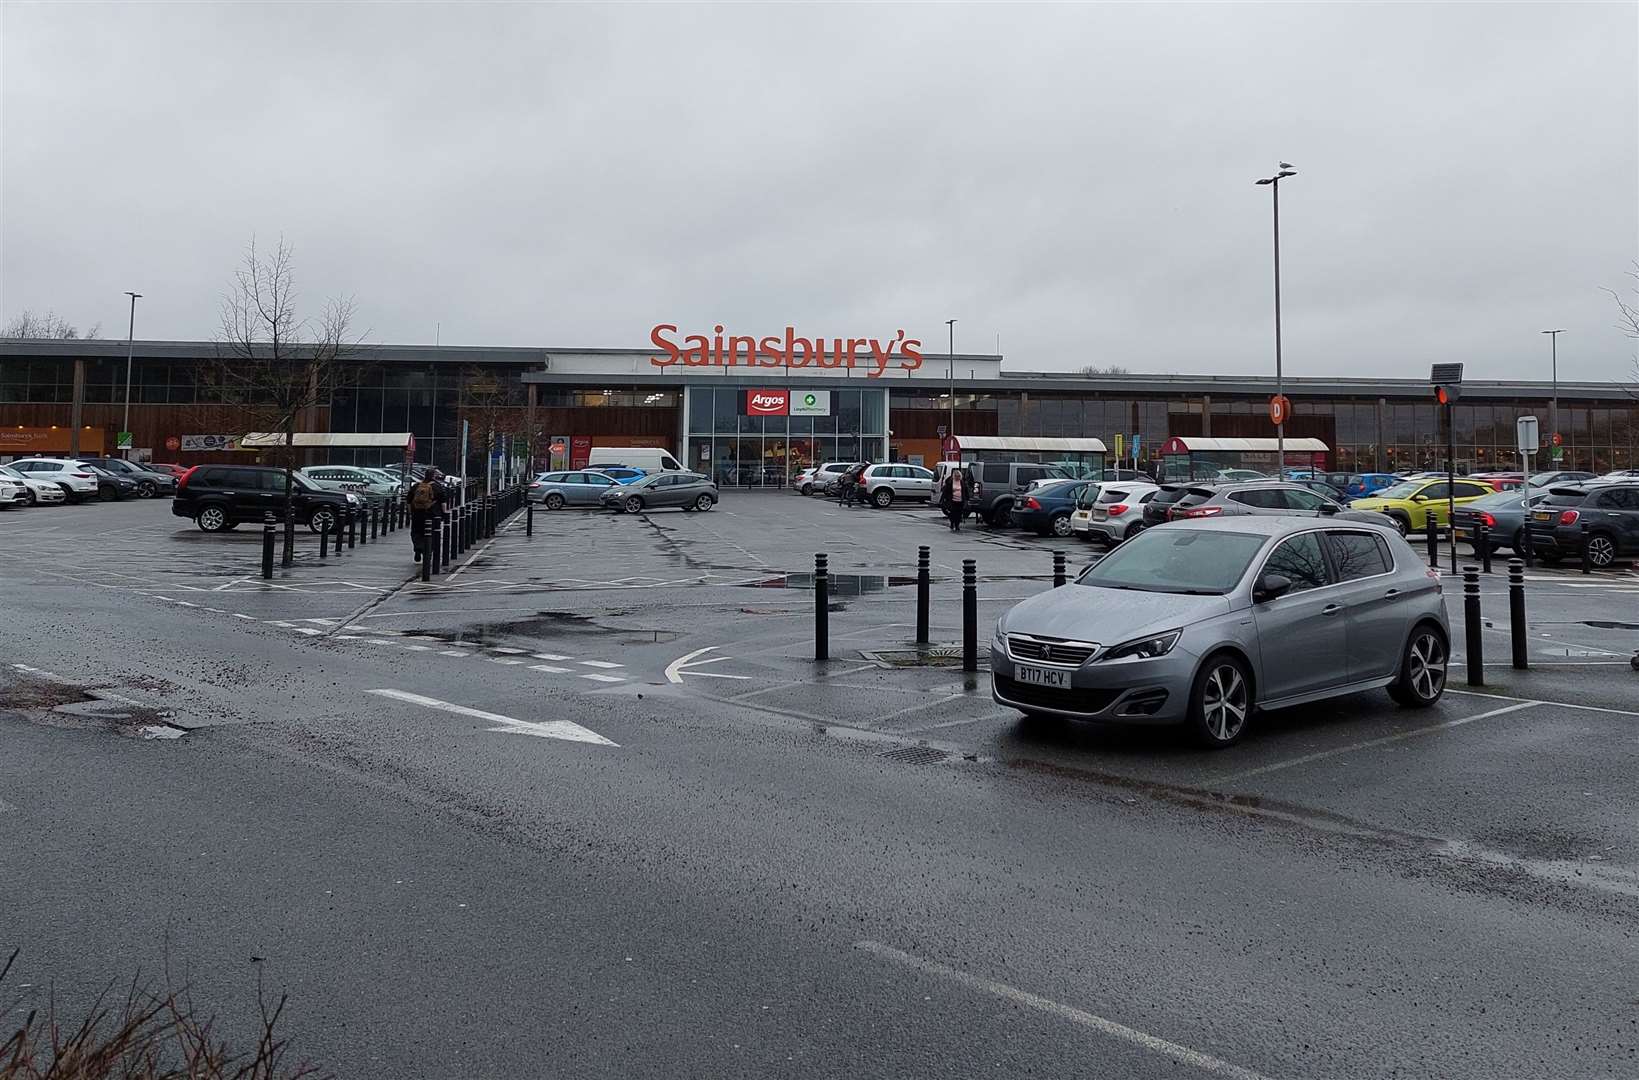 Bybrook Sainsbury's is just off Simone Weil Avenue